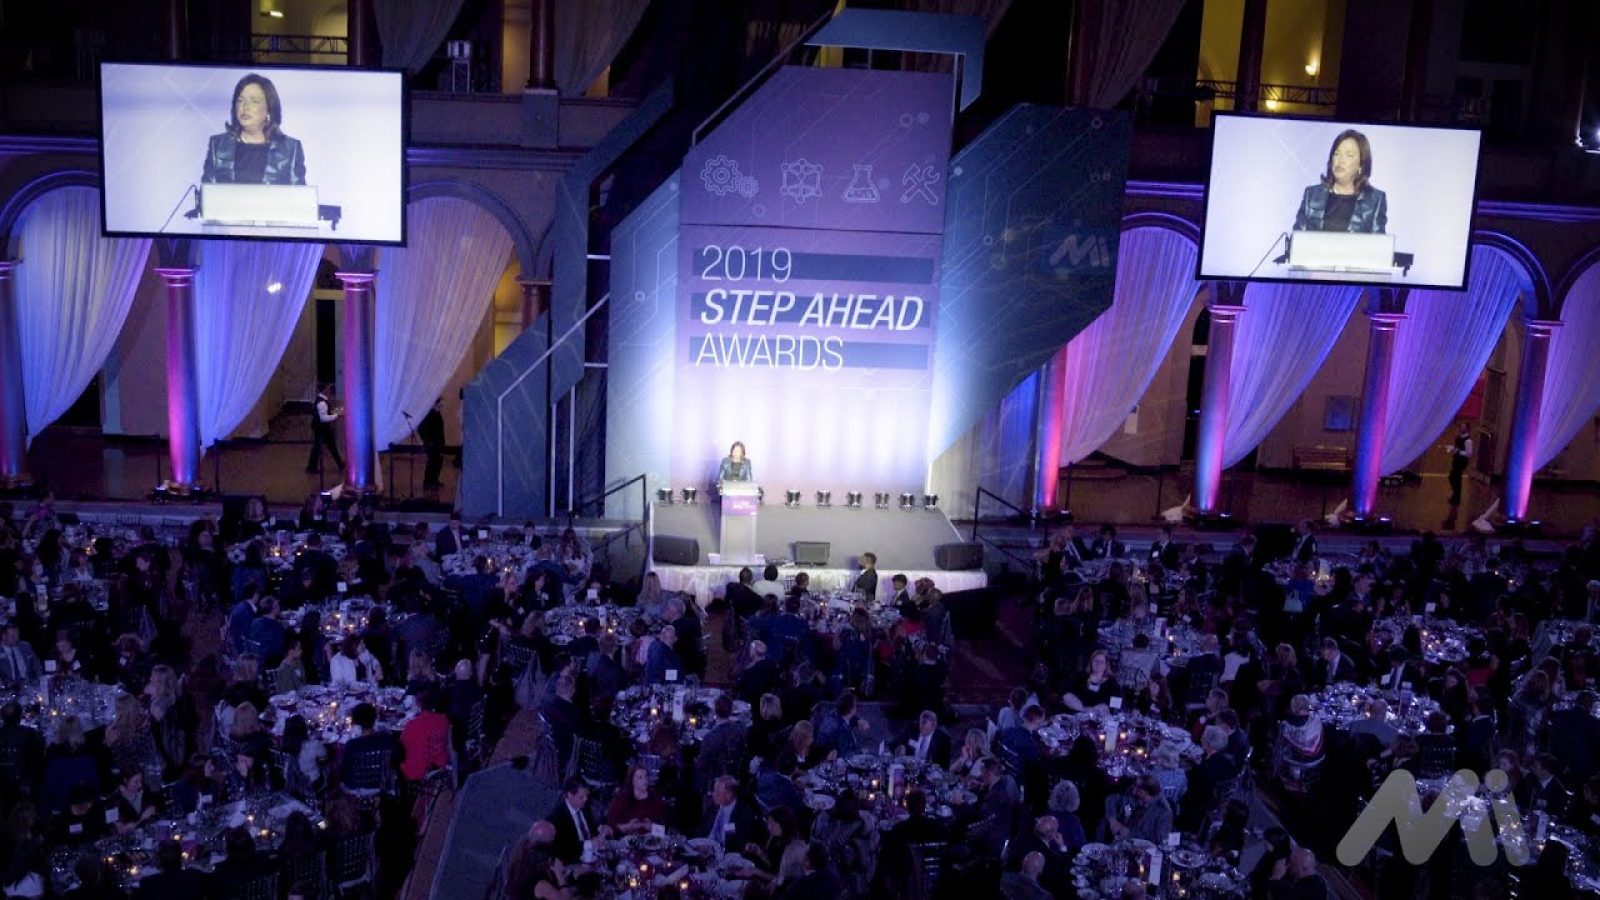 STEP ahead awards stage photograph